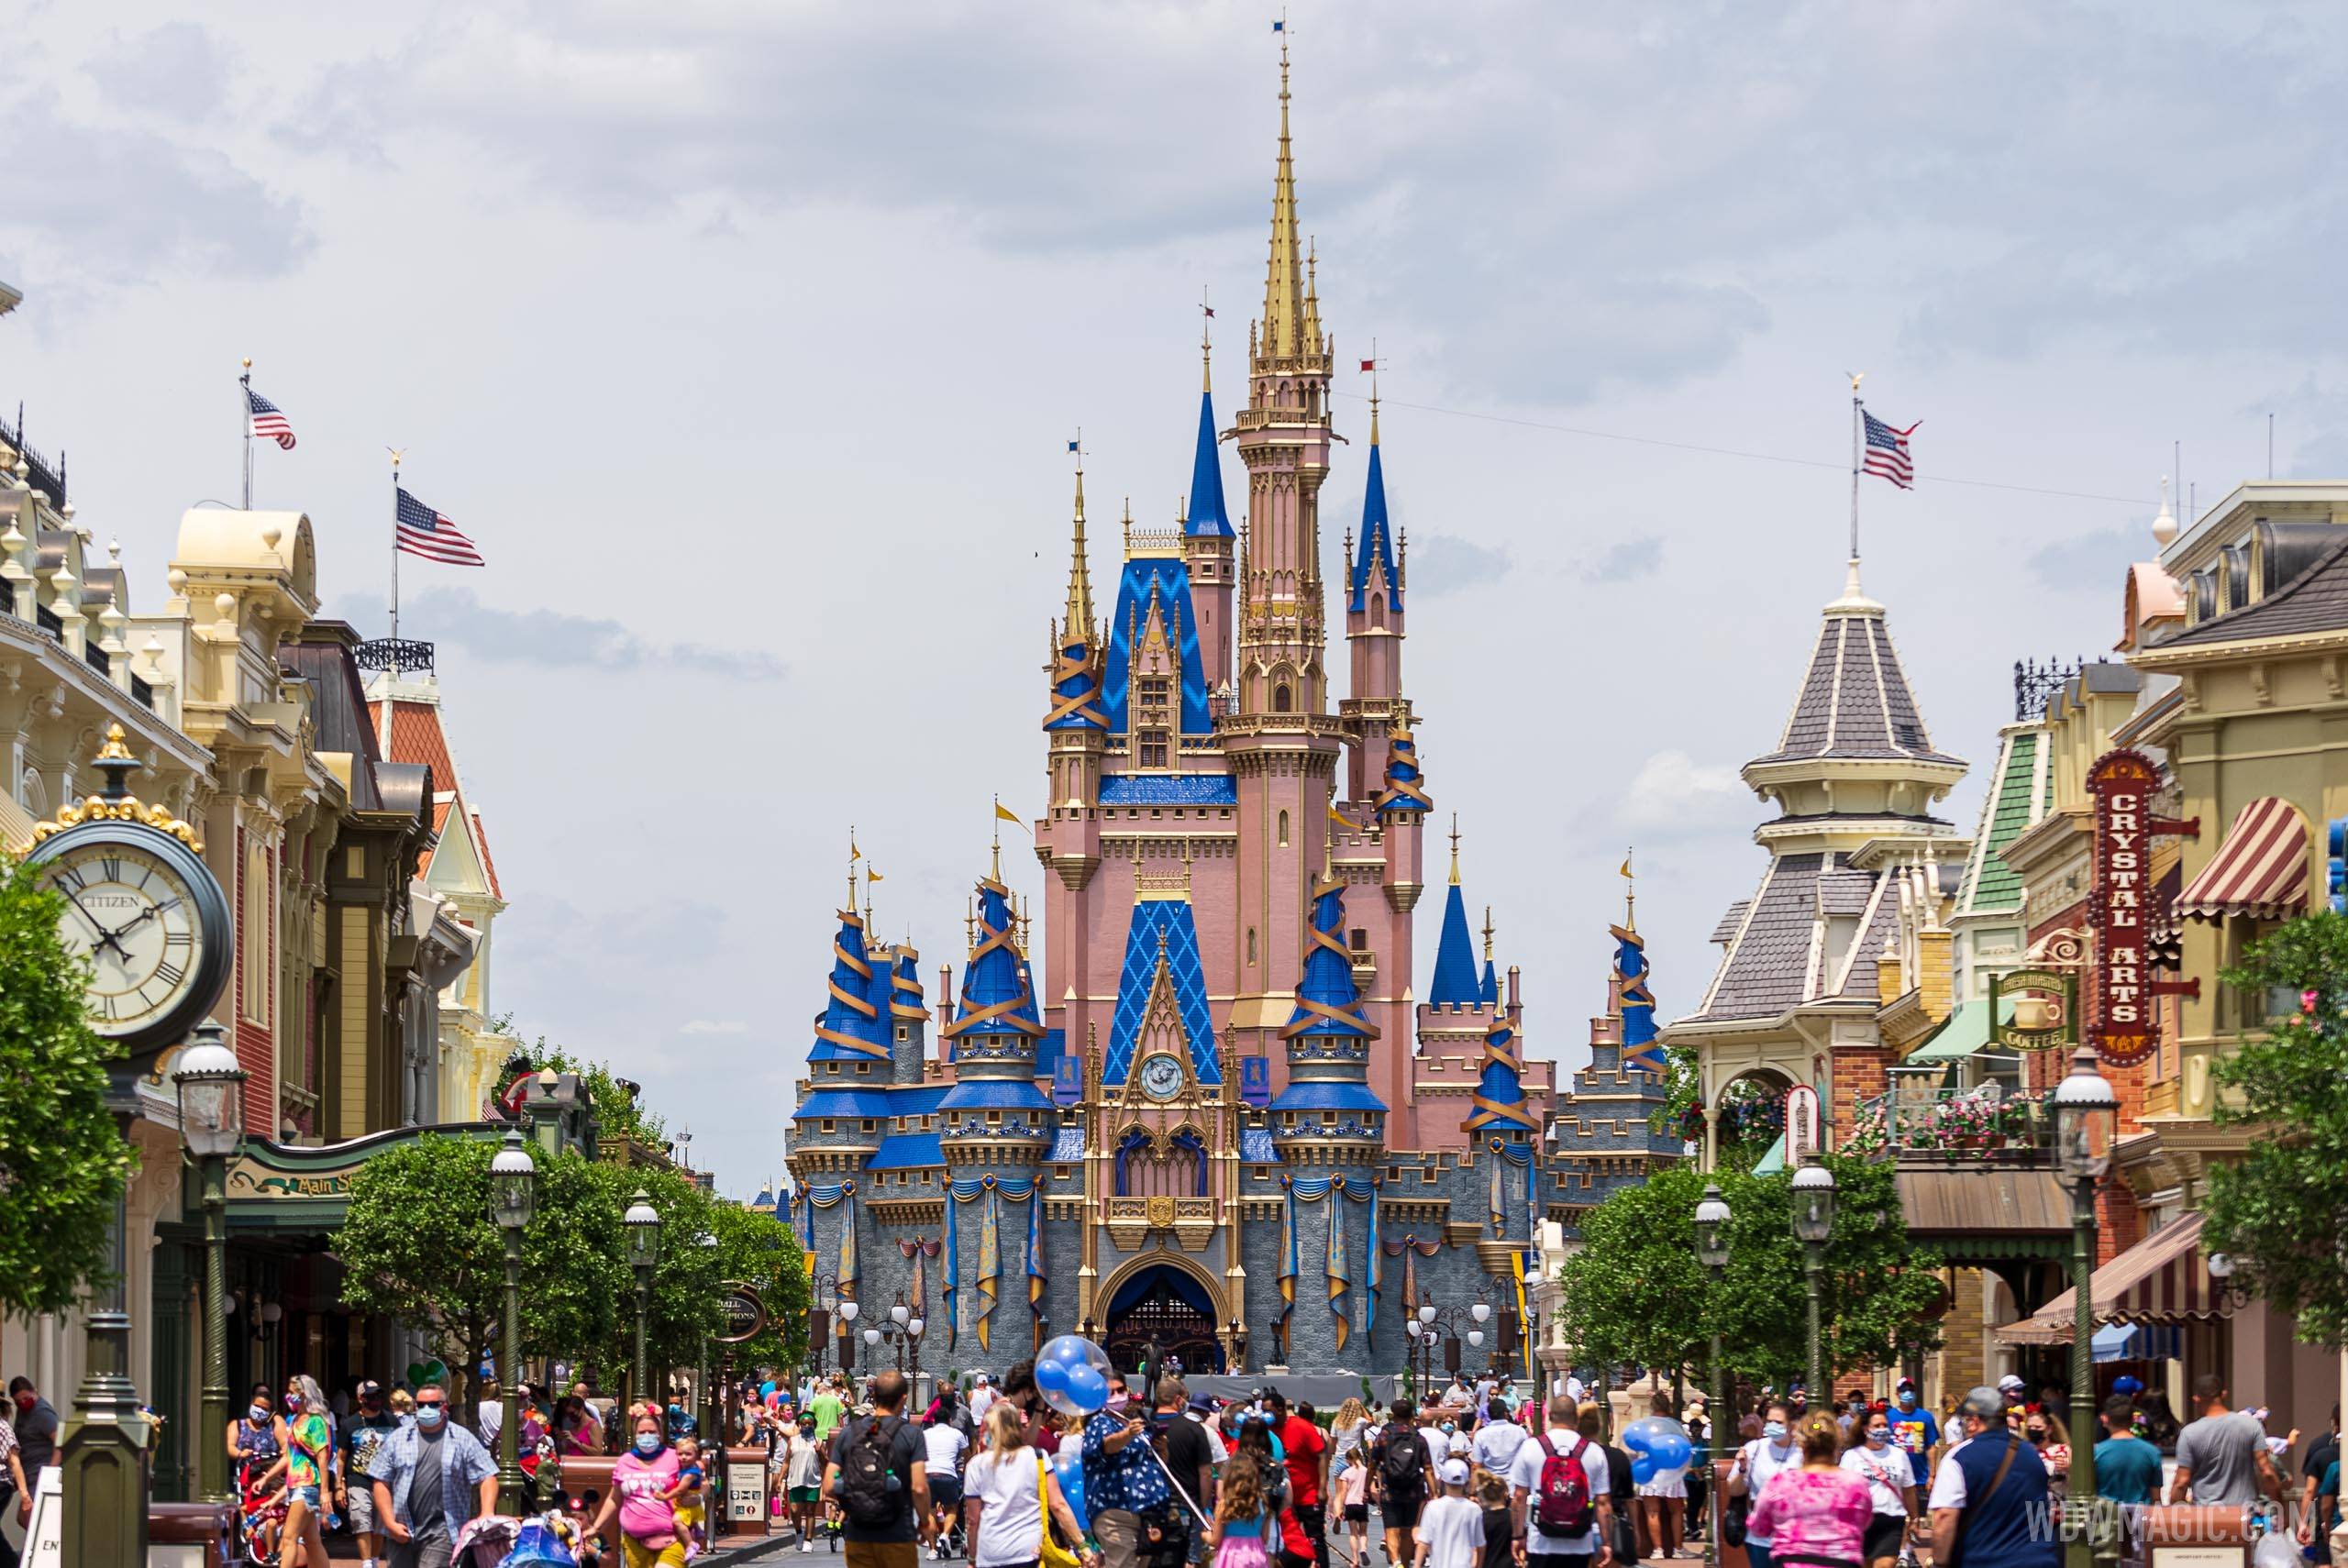 Magic Kingdom is currently scheduled for a 9am to 9pm operating day in August